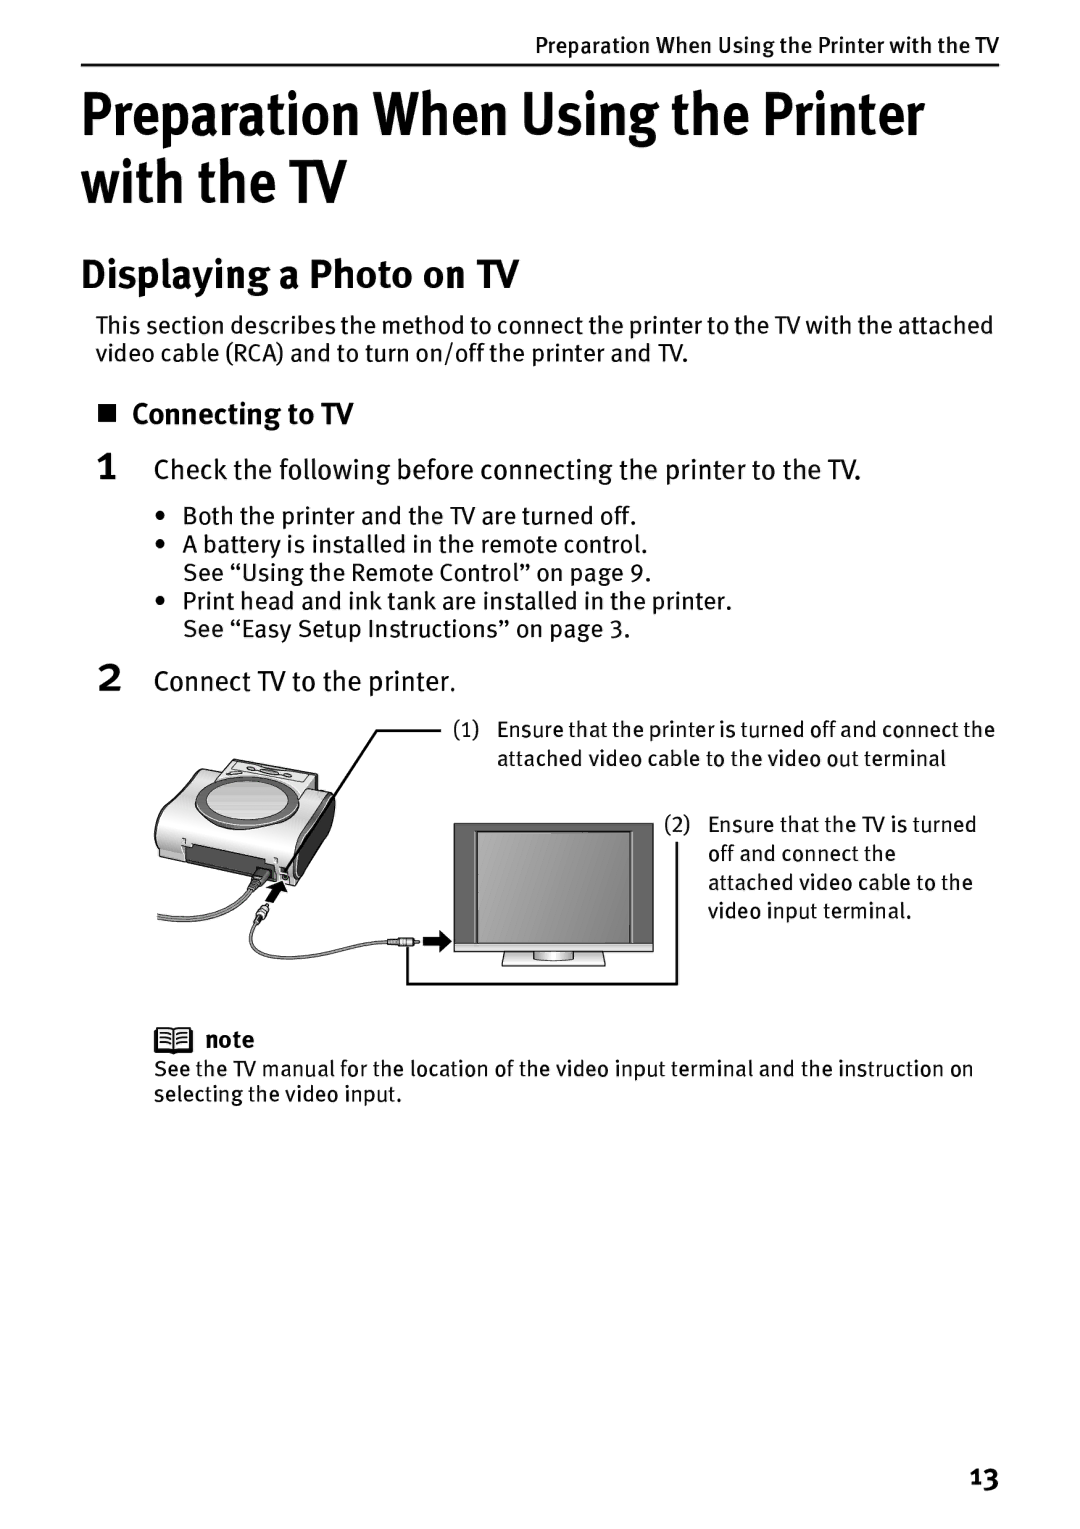 Canon DS700 manual Preparation When Using the Printer with the TV, Displaying a Photo on TV, „ Connecting to TV 